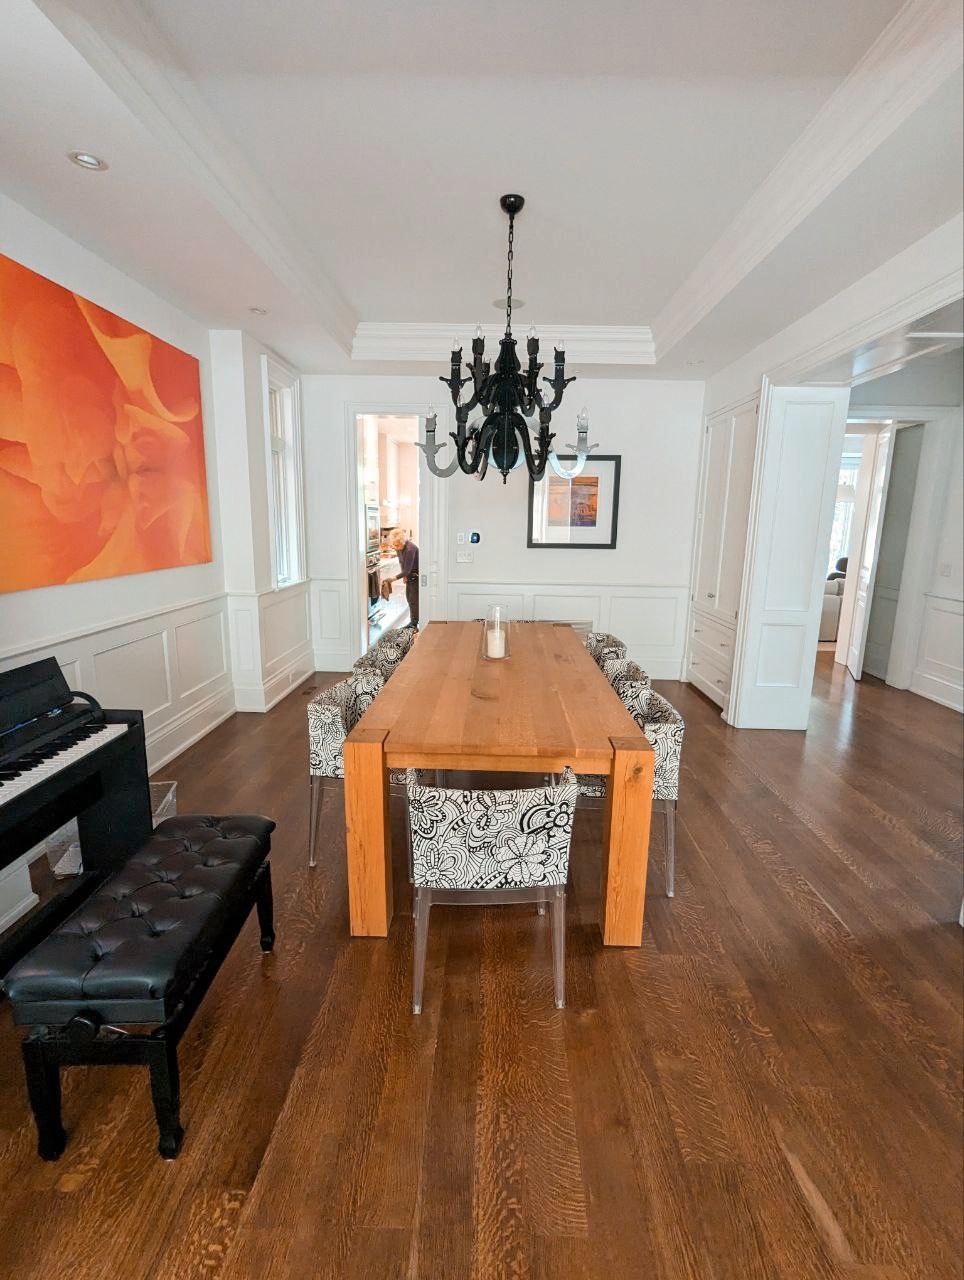 After photos of a full house painting of interior in Rosedale, experience the transformative elegance of crisp white walls baseboards, wainscoting and ceiling of a spcacious open concept bright dining room.